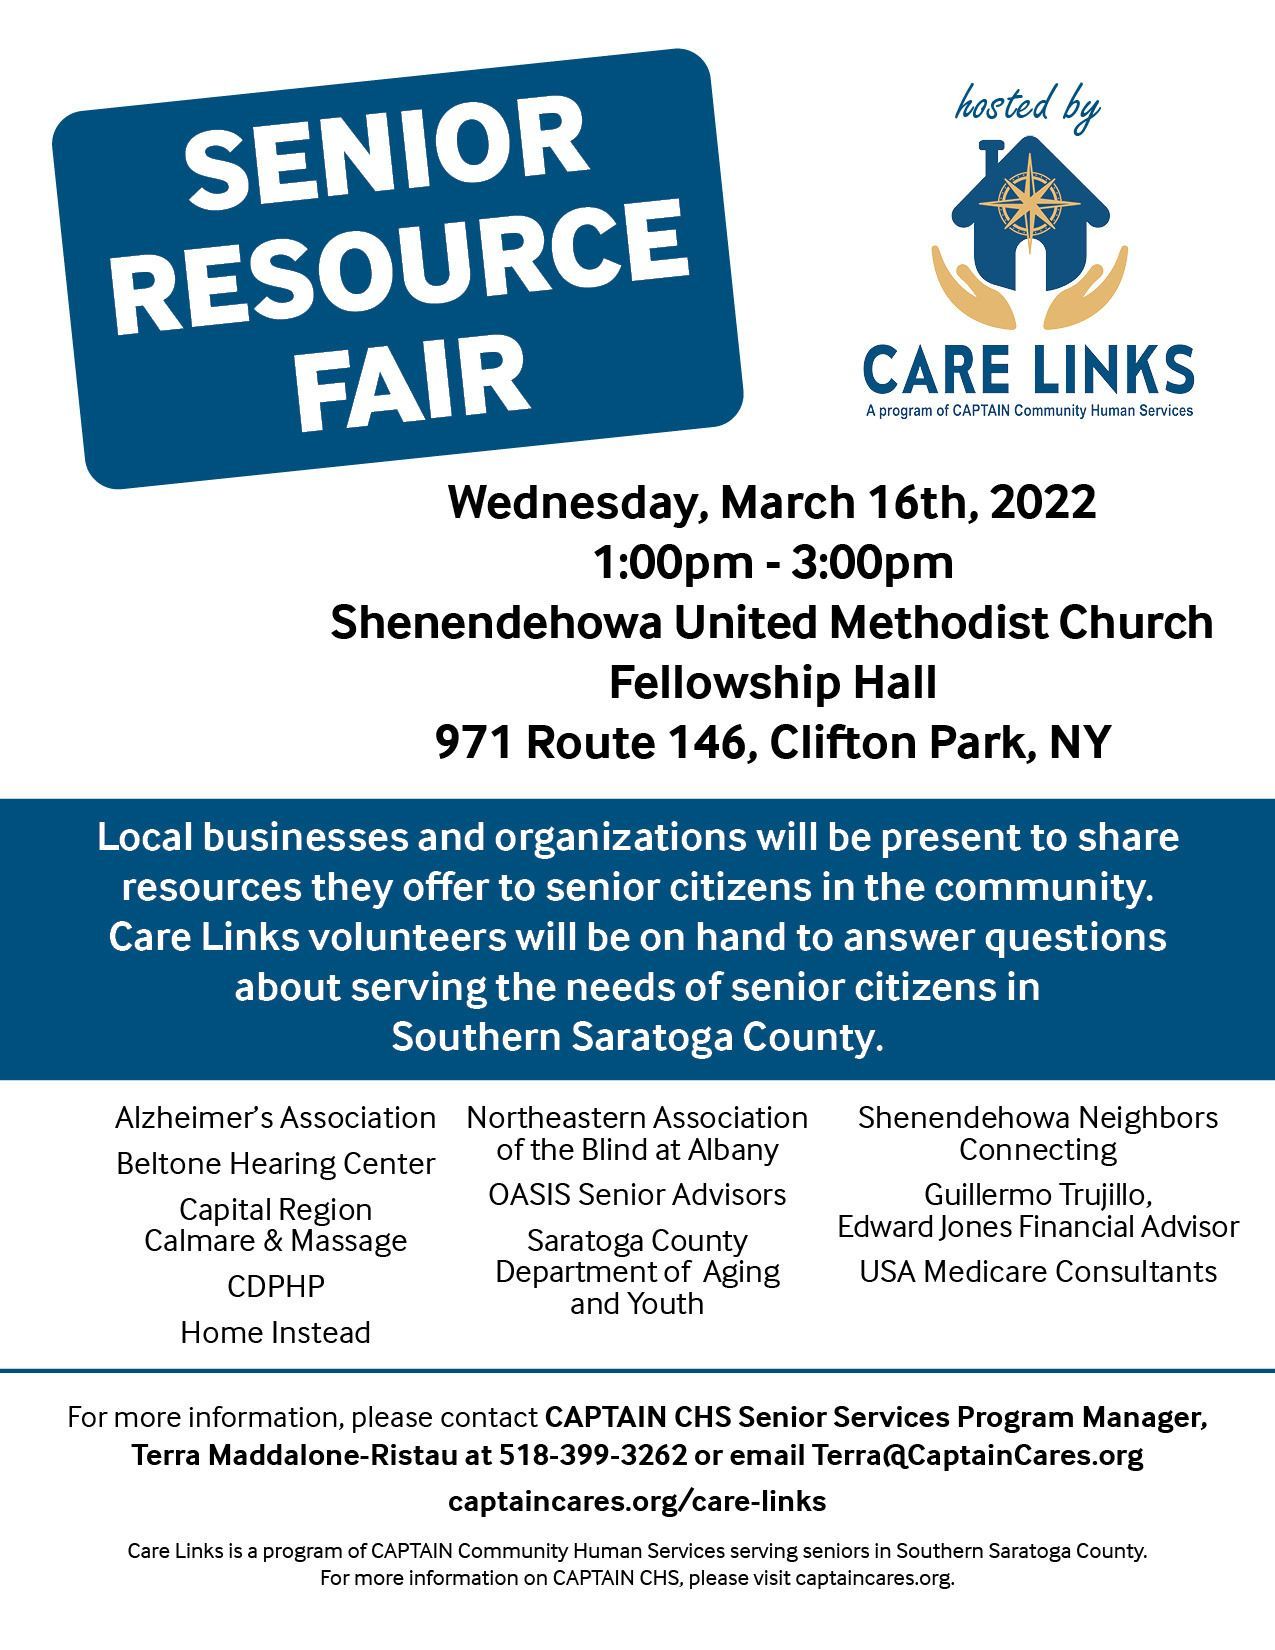 Join Care Links for the Senior Resource Fair!